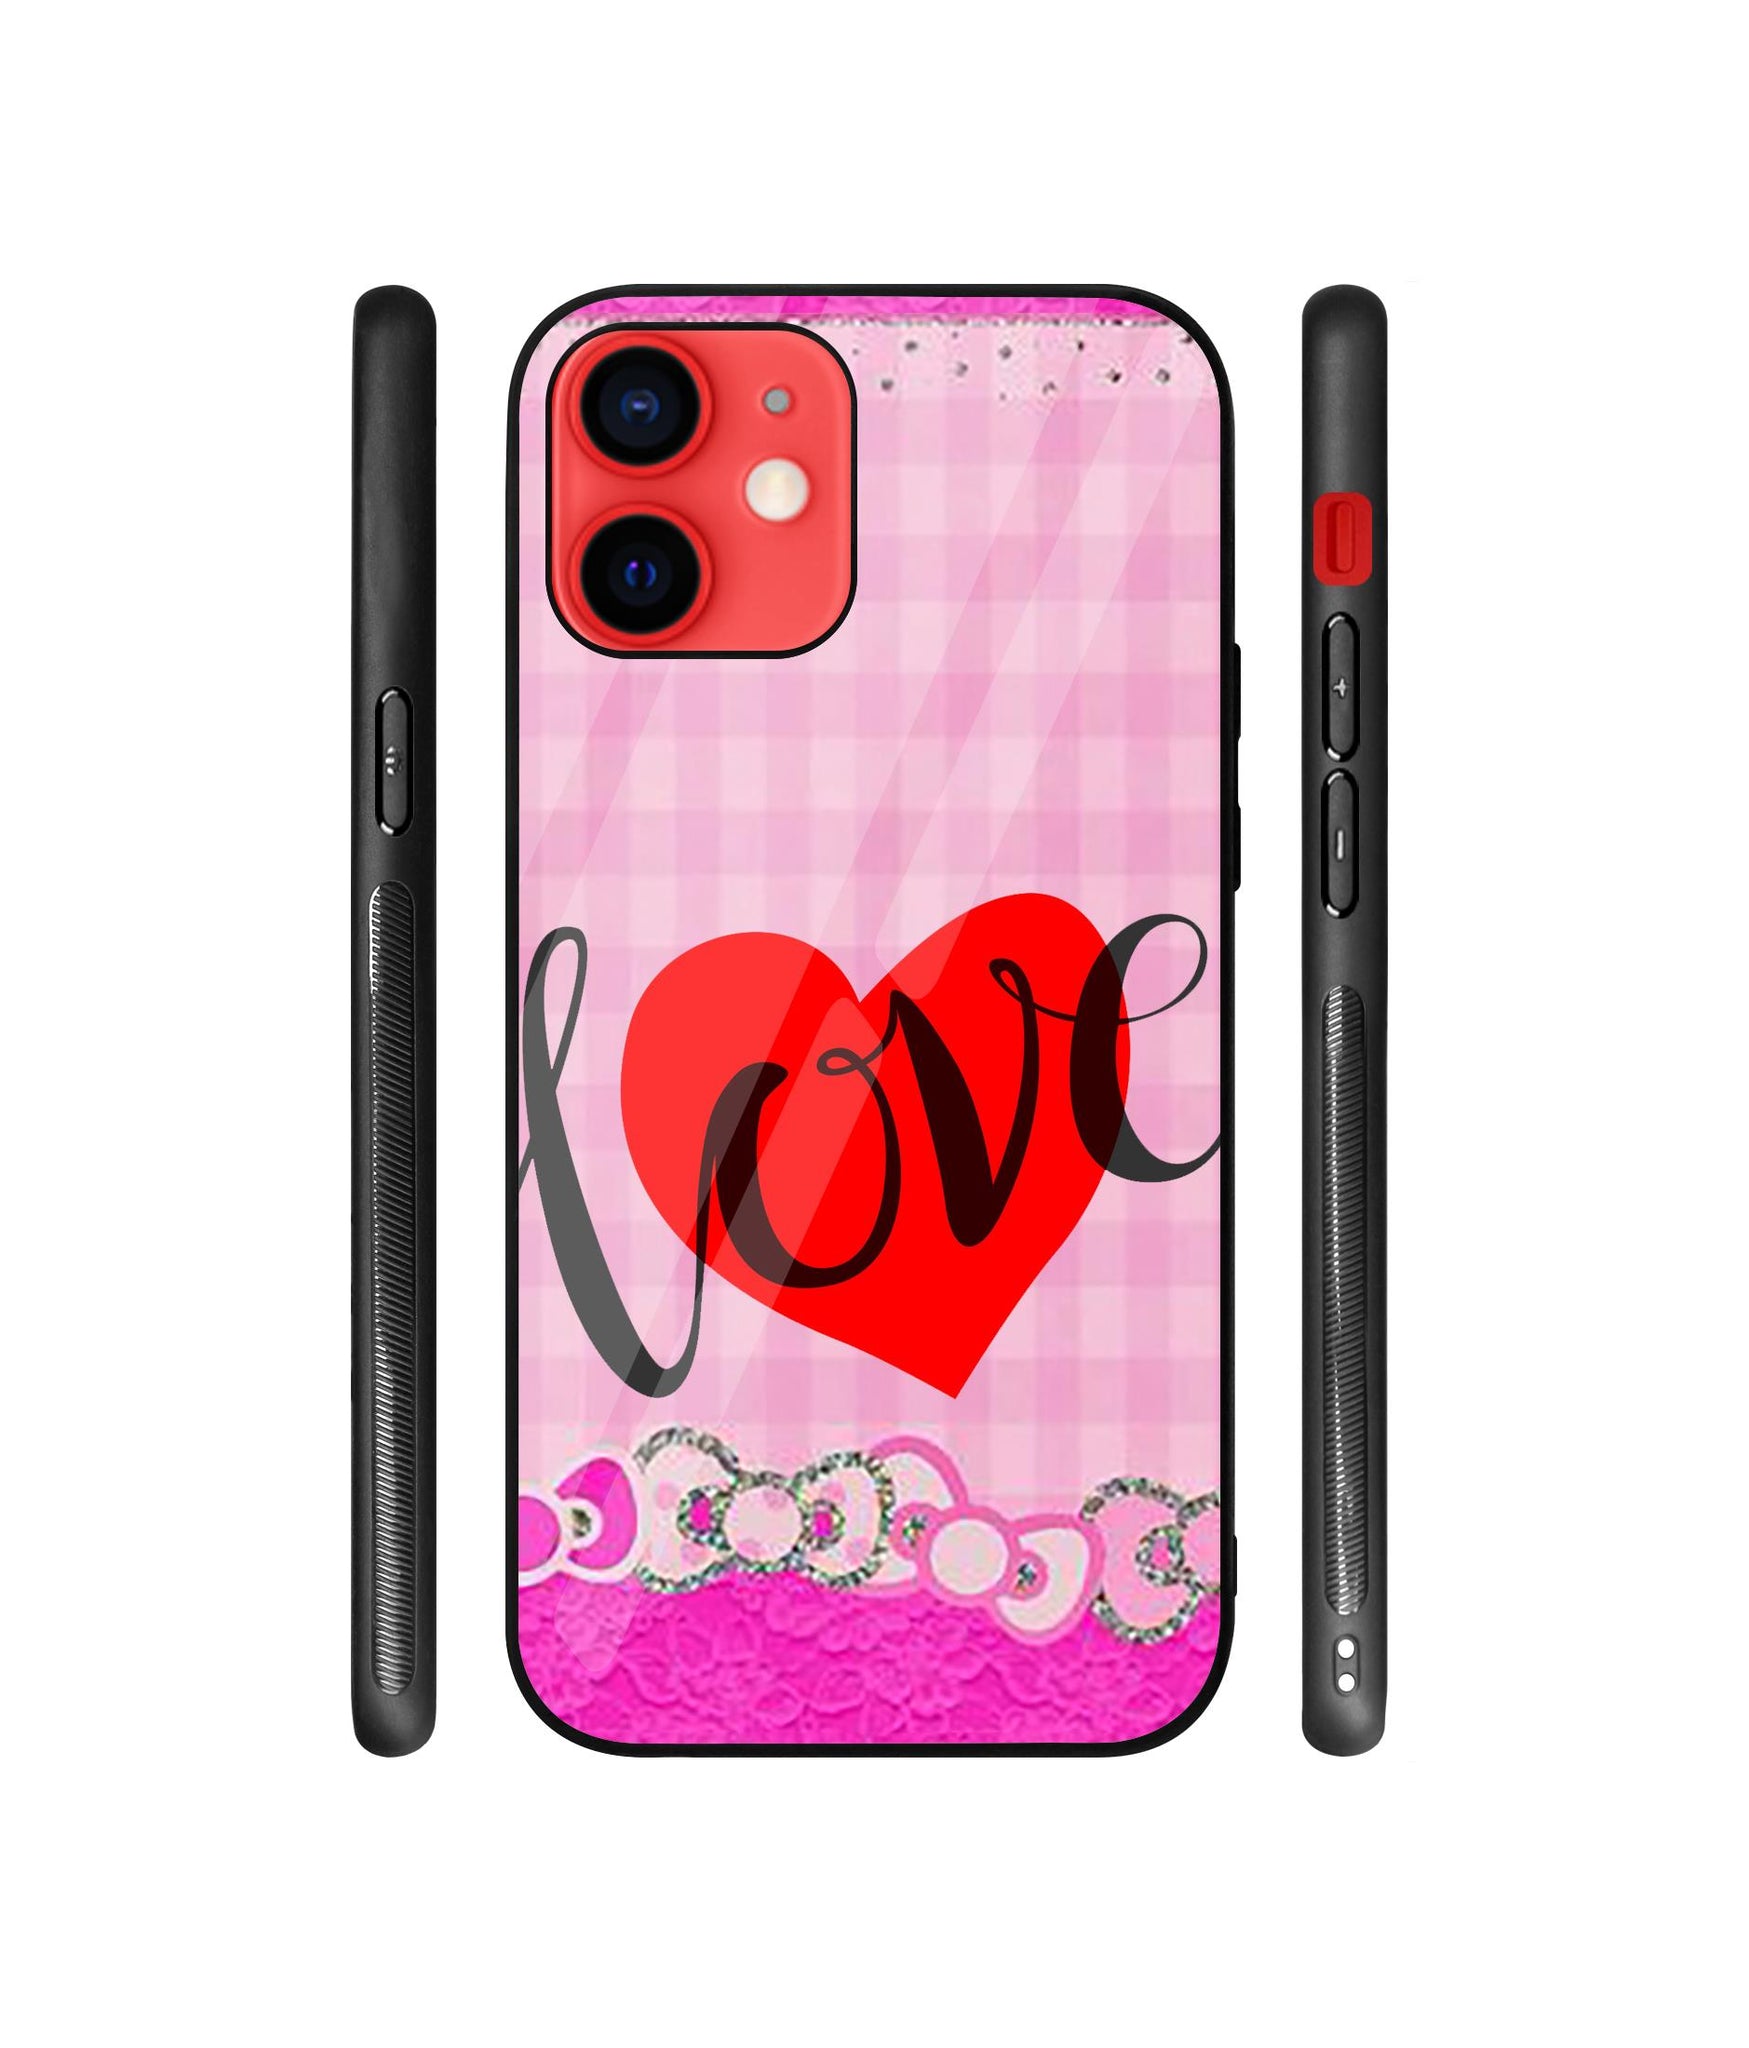 Love Print On Cloth Designer Printed Glass Cover for Apple iPhone 12 / iPhone 12 Pro